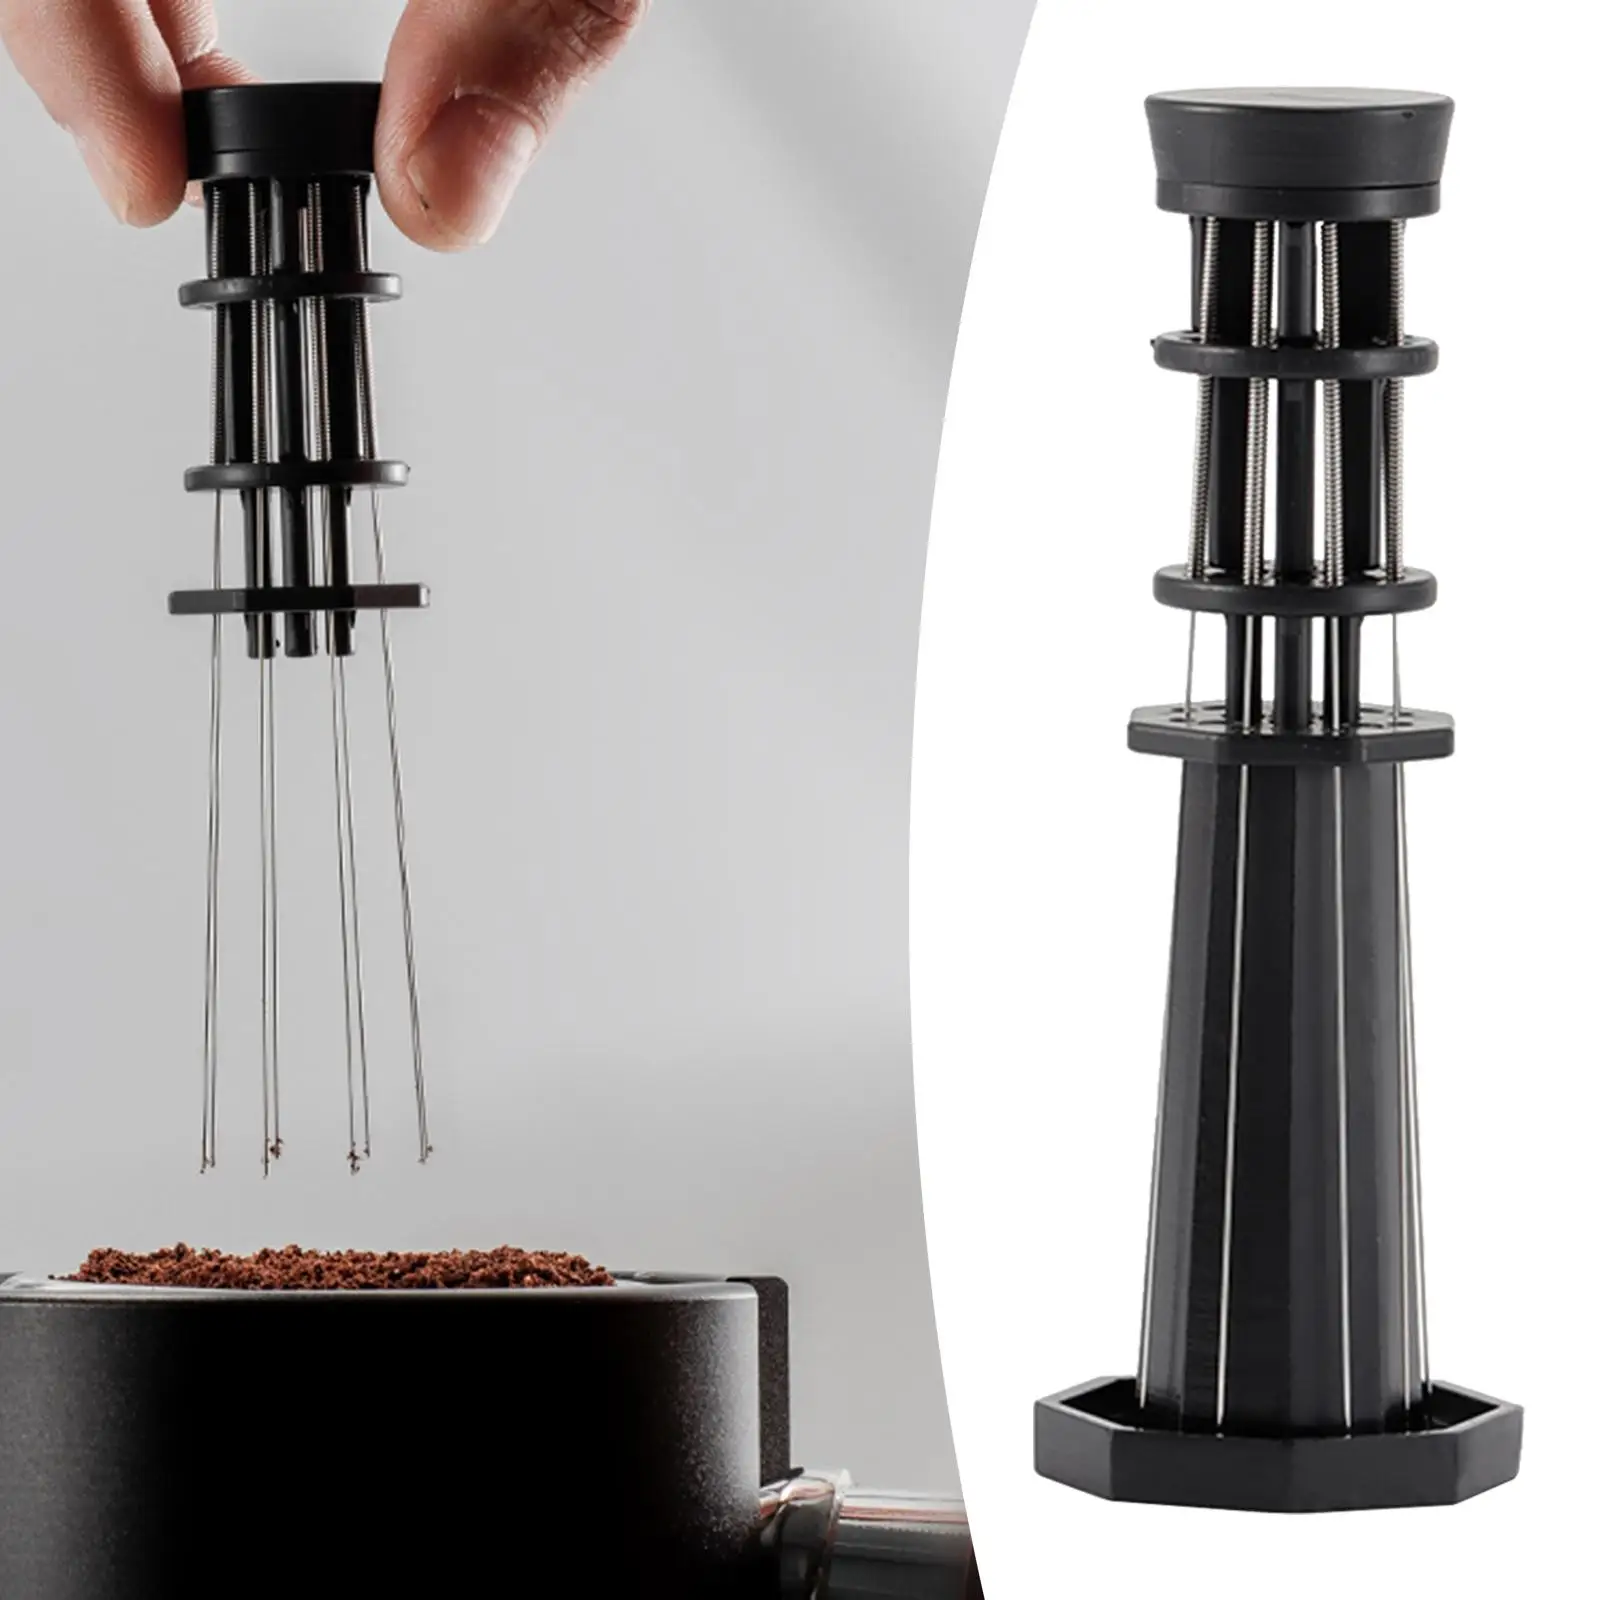 Adjustable Coffee Stirring Tool Coffee Grounds Needle Hand Tamper with Stand Needle Type Distributor for Office Home Cafe